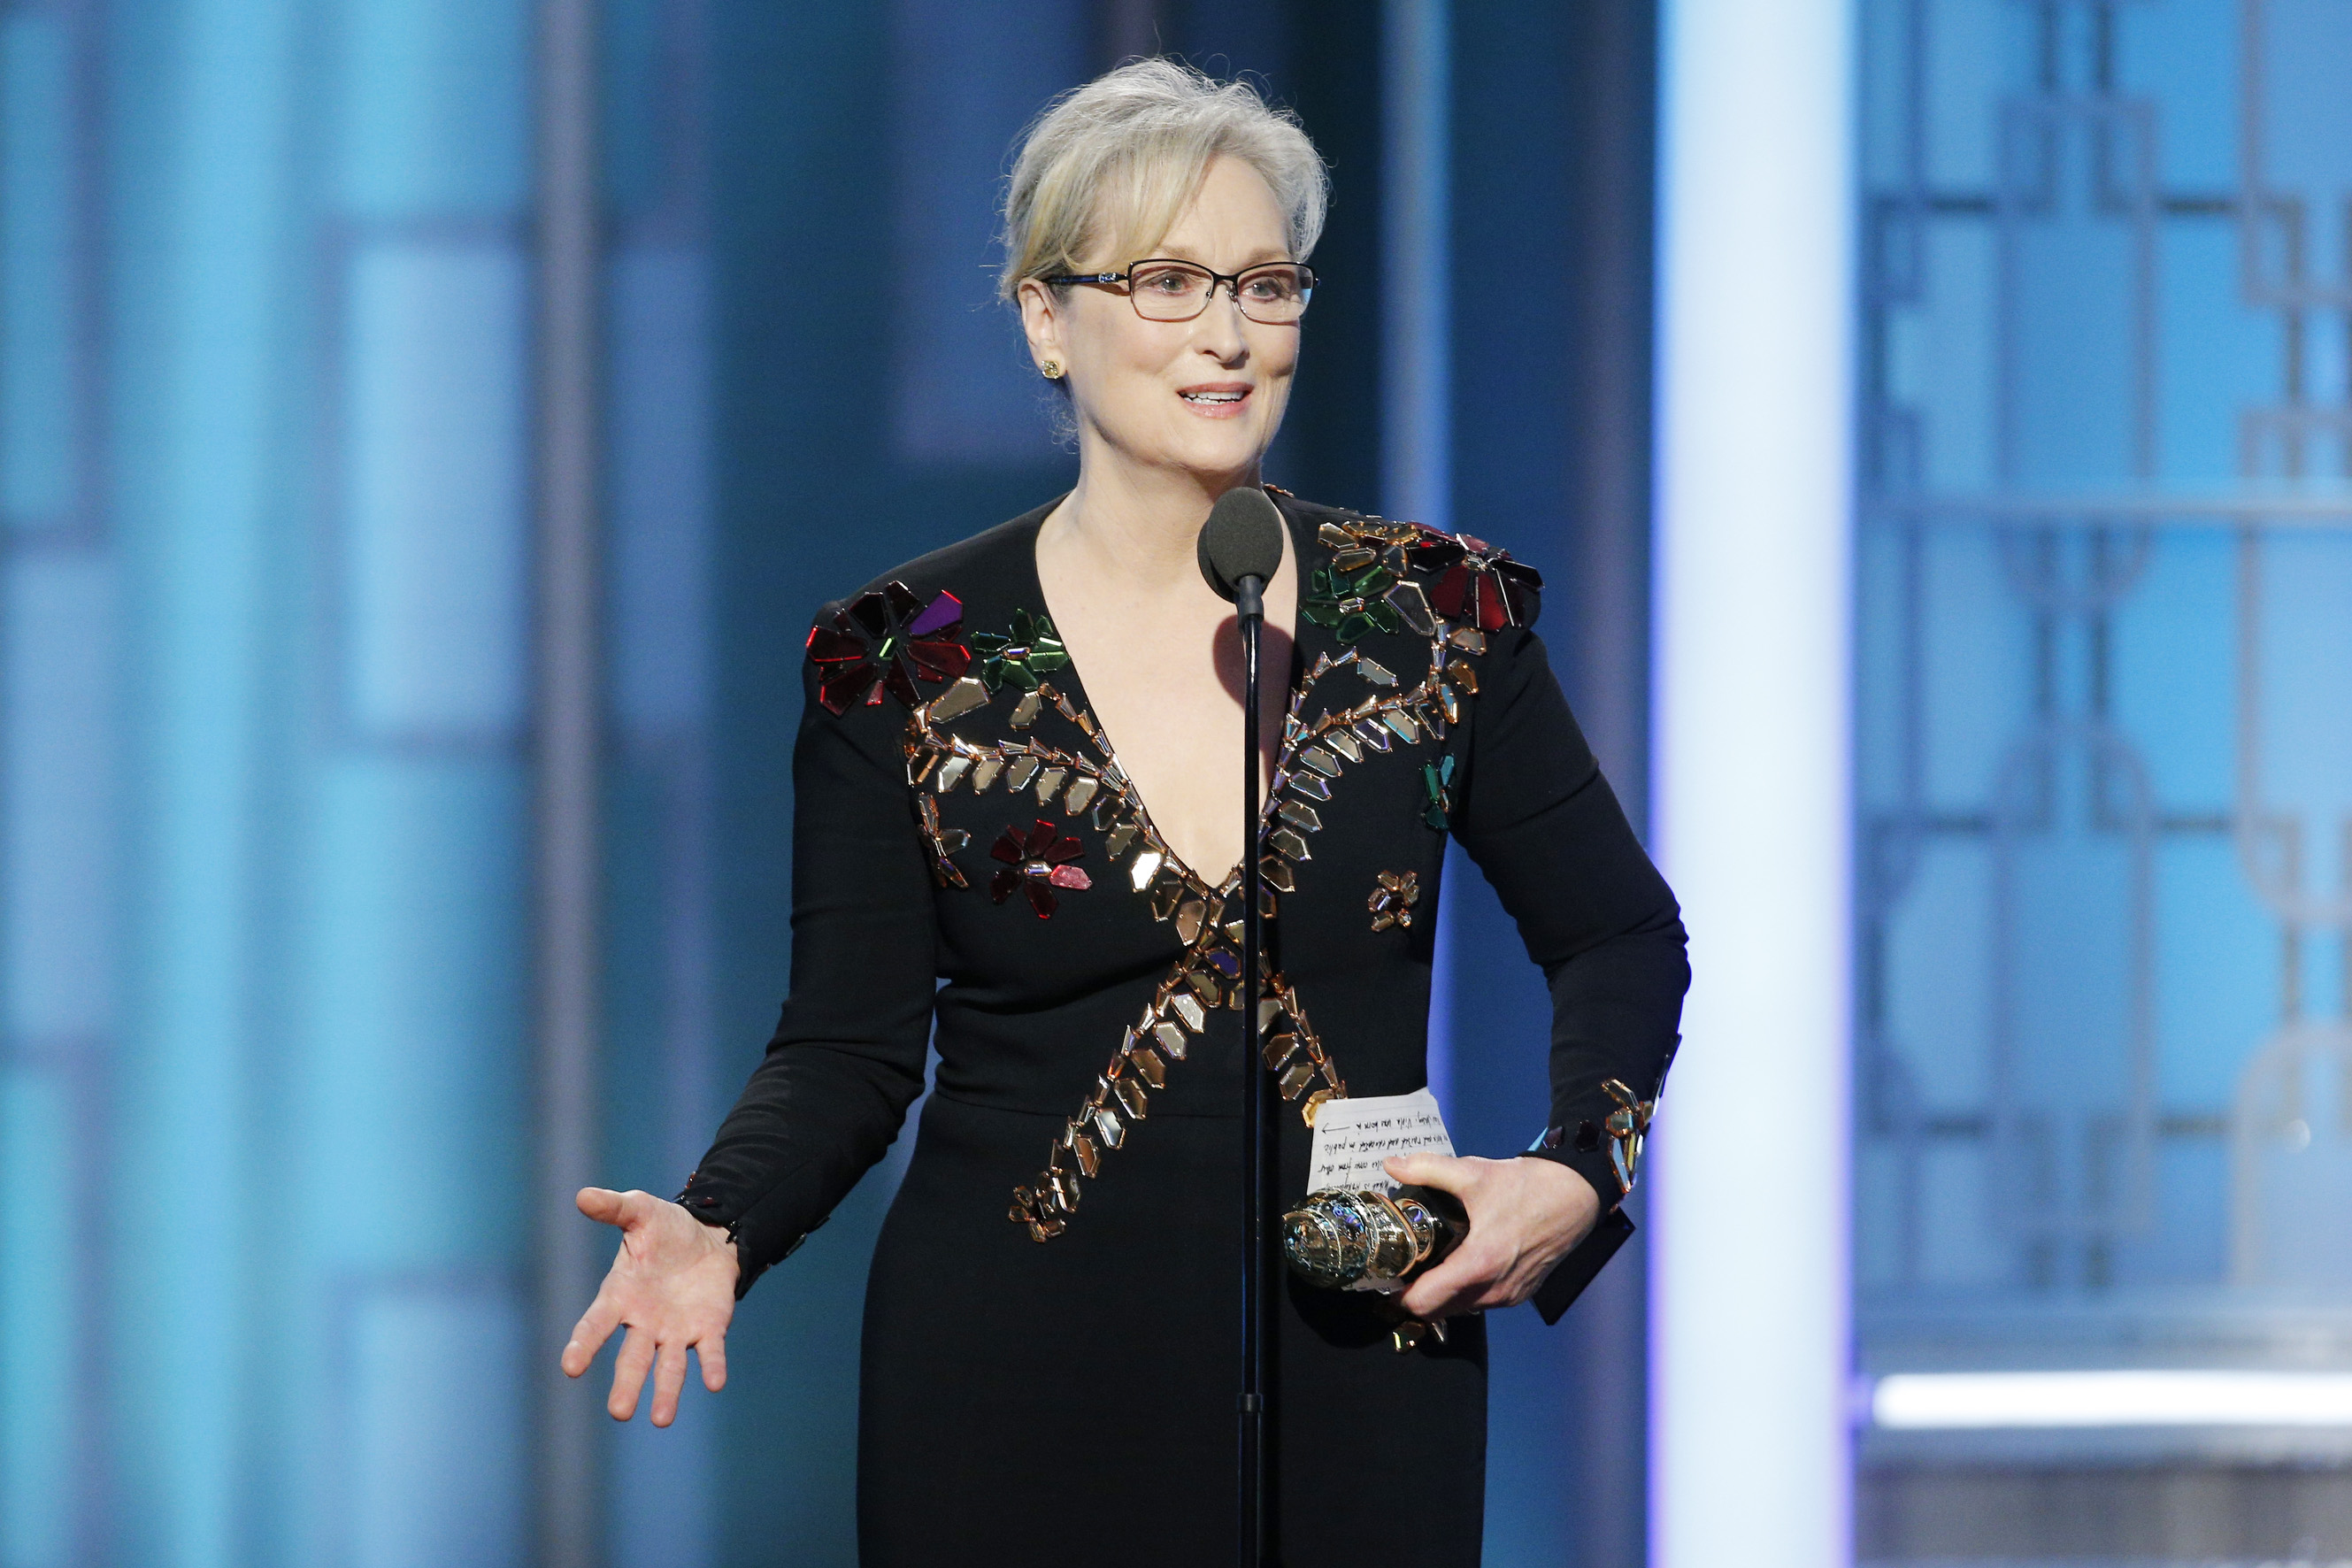 Meryl Streep accepts the Cecil B. DeMille Award during the 74th Annual Golden Globe Awards at The Beverly Hilton Hotel, Jan.8, 2017 in Beverly Hills, Calif. (Paul Drinkwater—NBCUniversal/Getty Images)